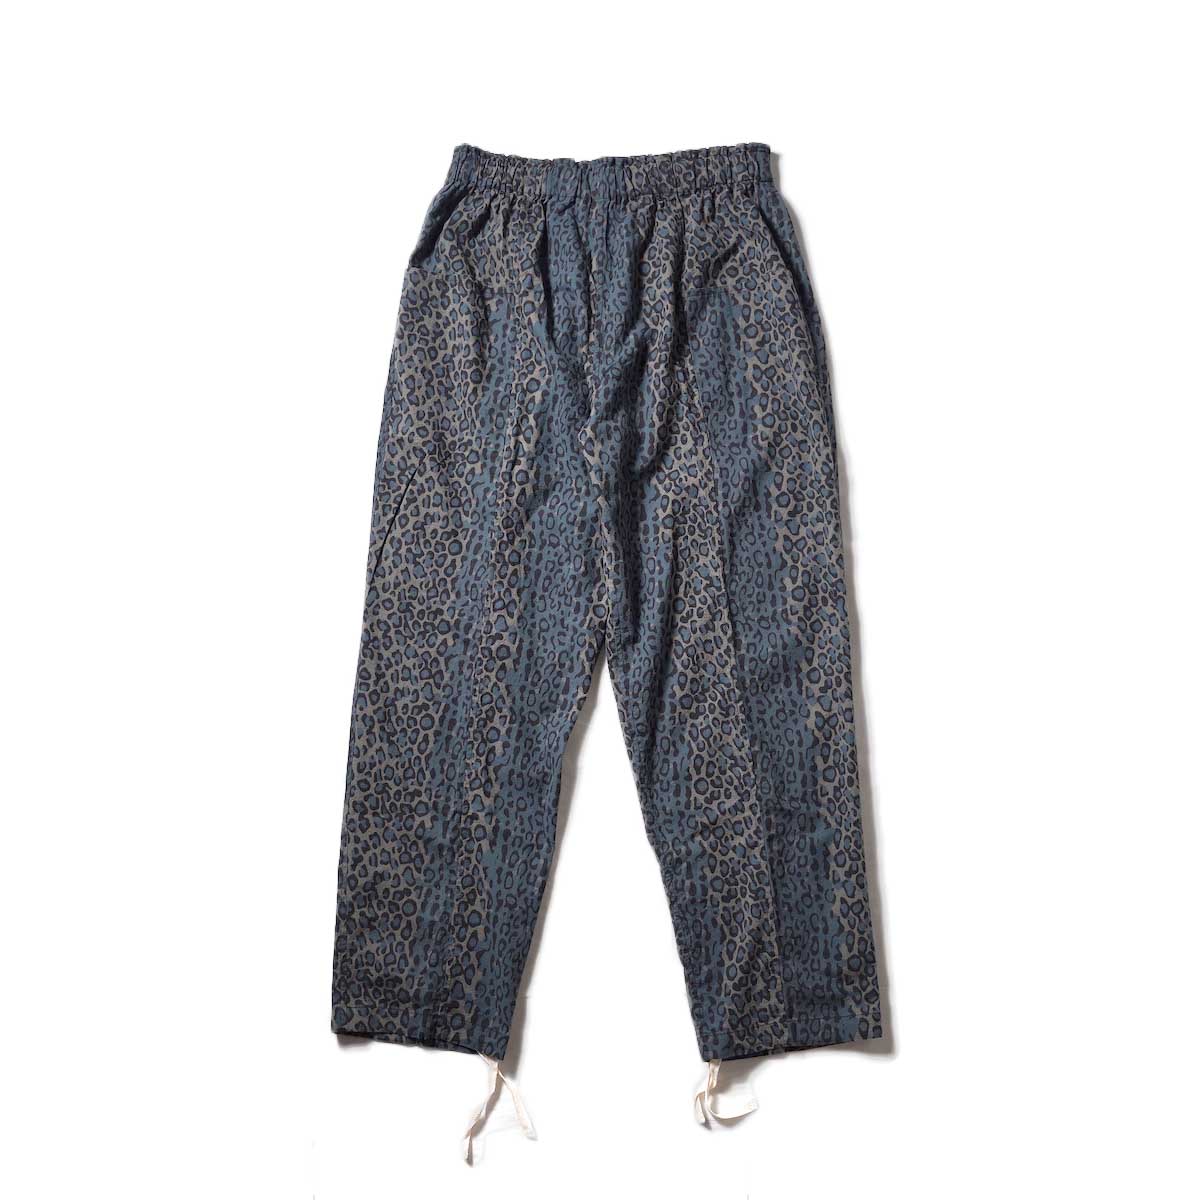 South2 West8 / ARMY STRING PANT - FLANNEL PT. (Leopard)